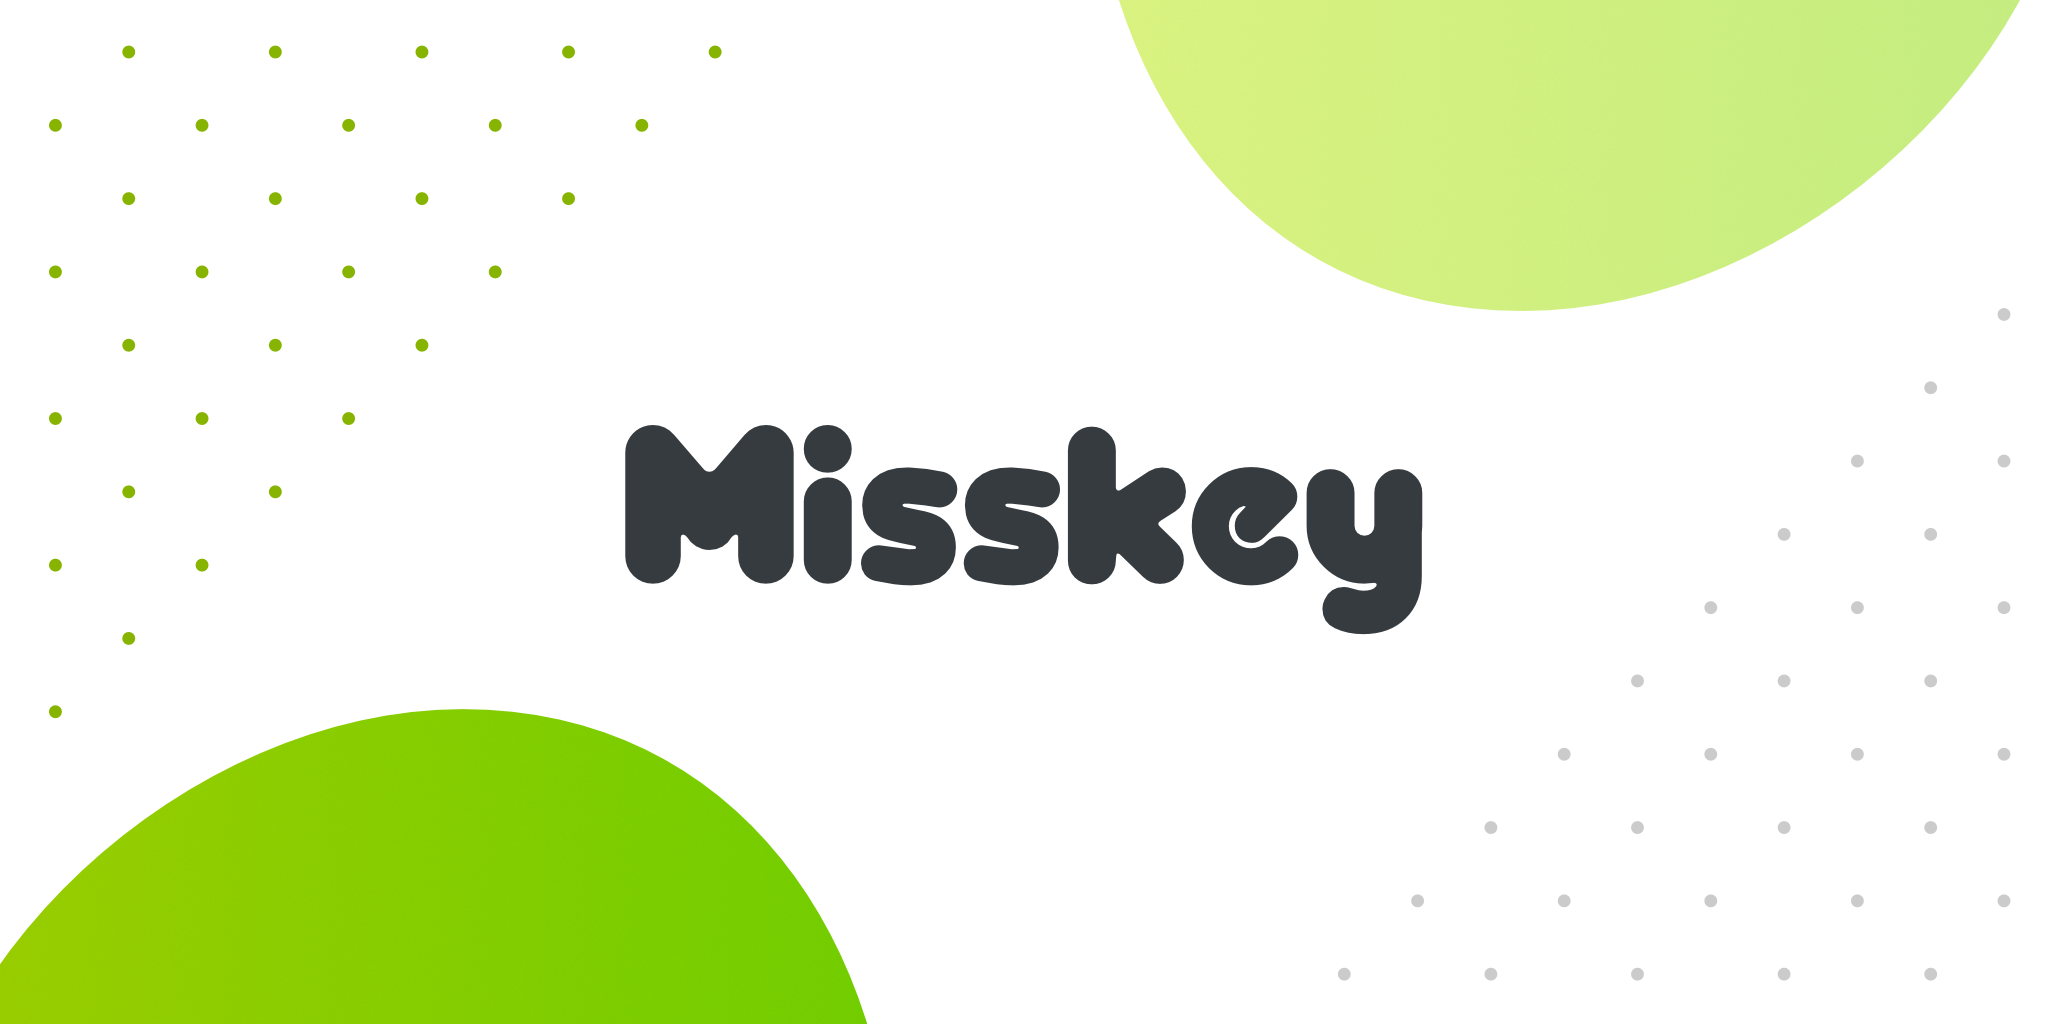 The Misskey wordmark in black on a white background with green circles